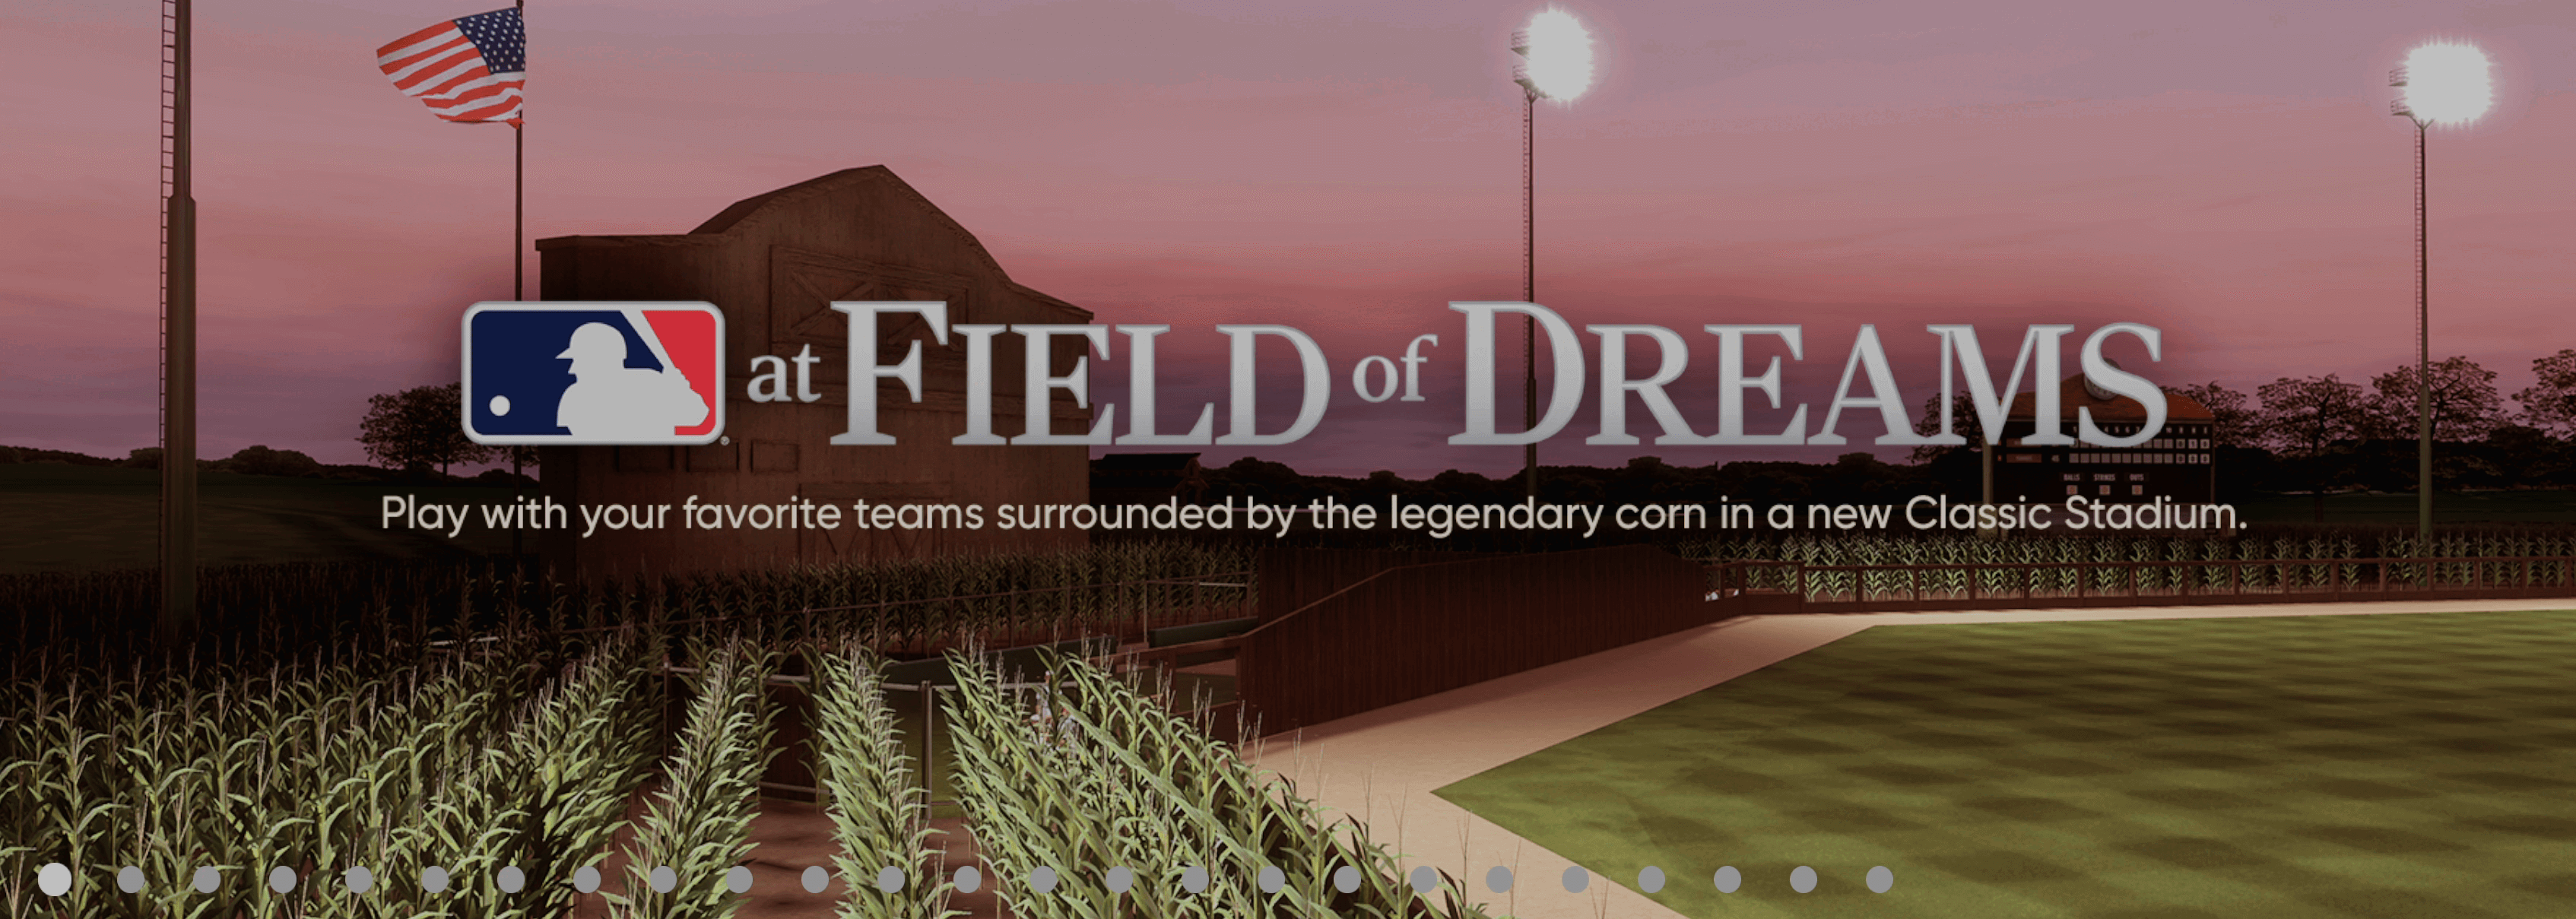 Field of Dreams Program and Goodies in MLB the Show 21